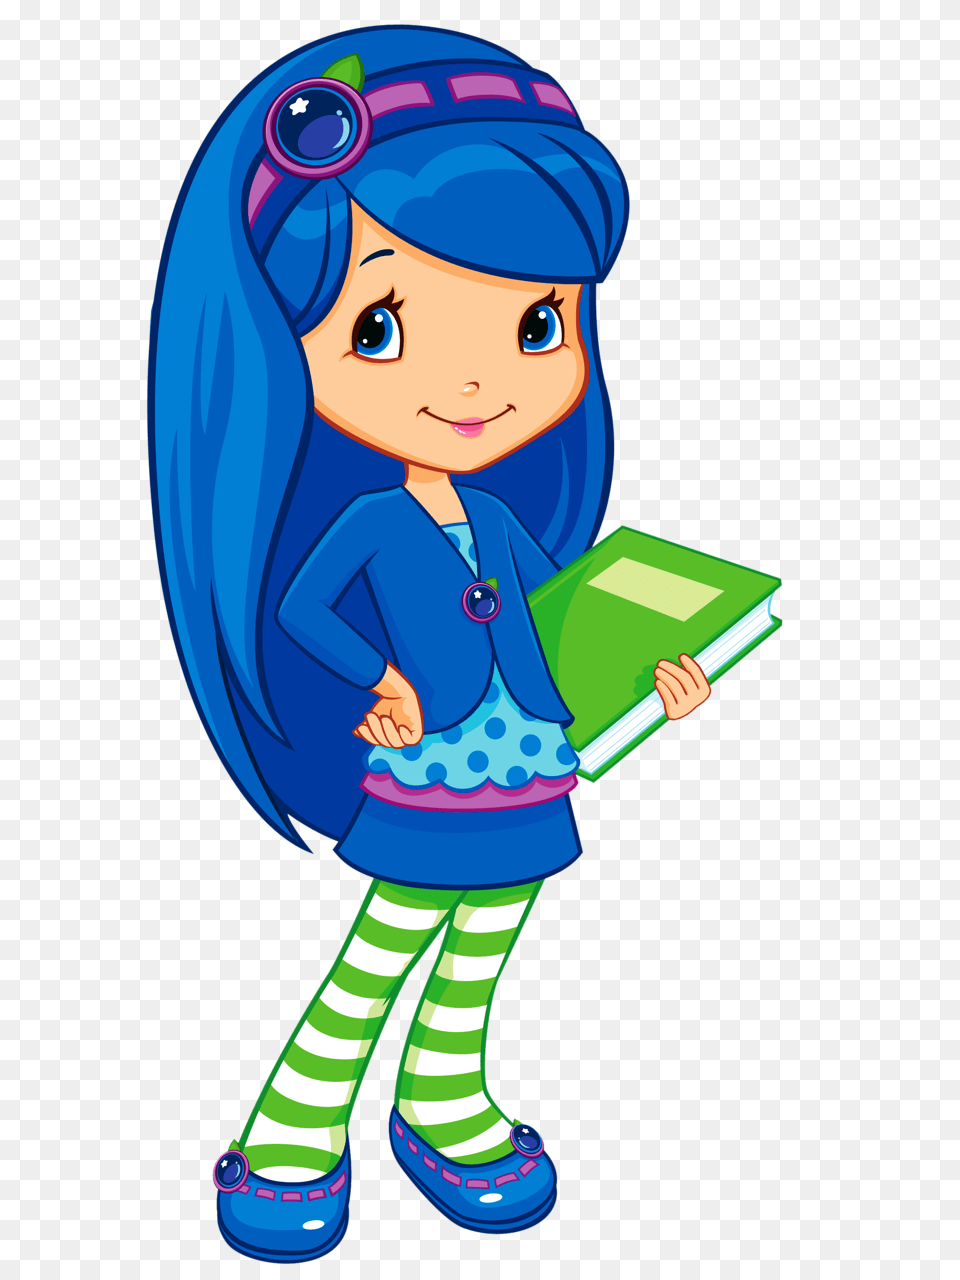 Strawberry Shortcake Strawberry Shortcake, Book, Comics, Publication, Baby Png